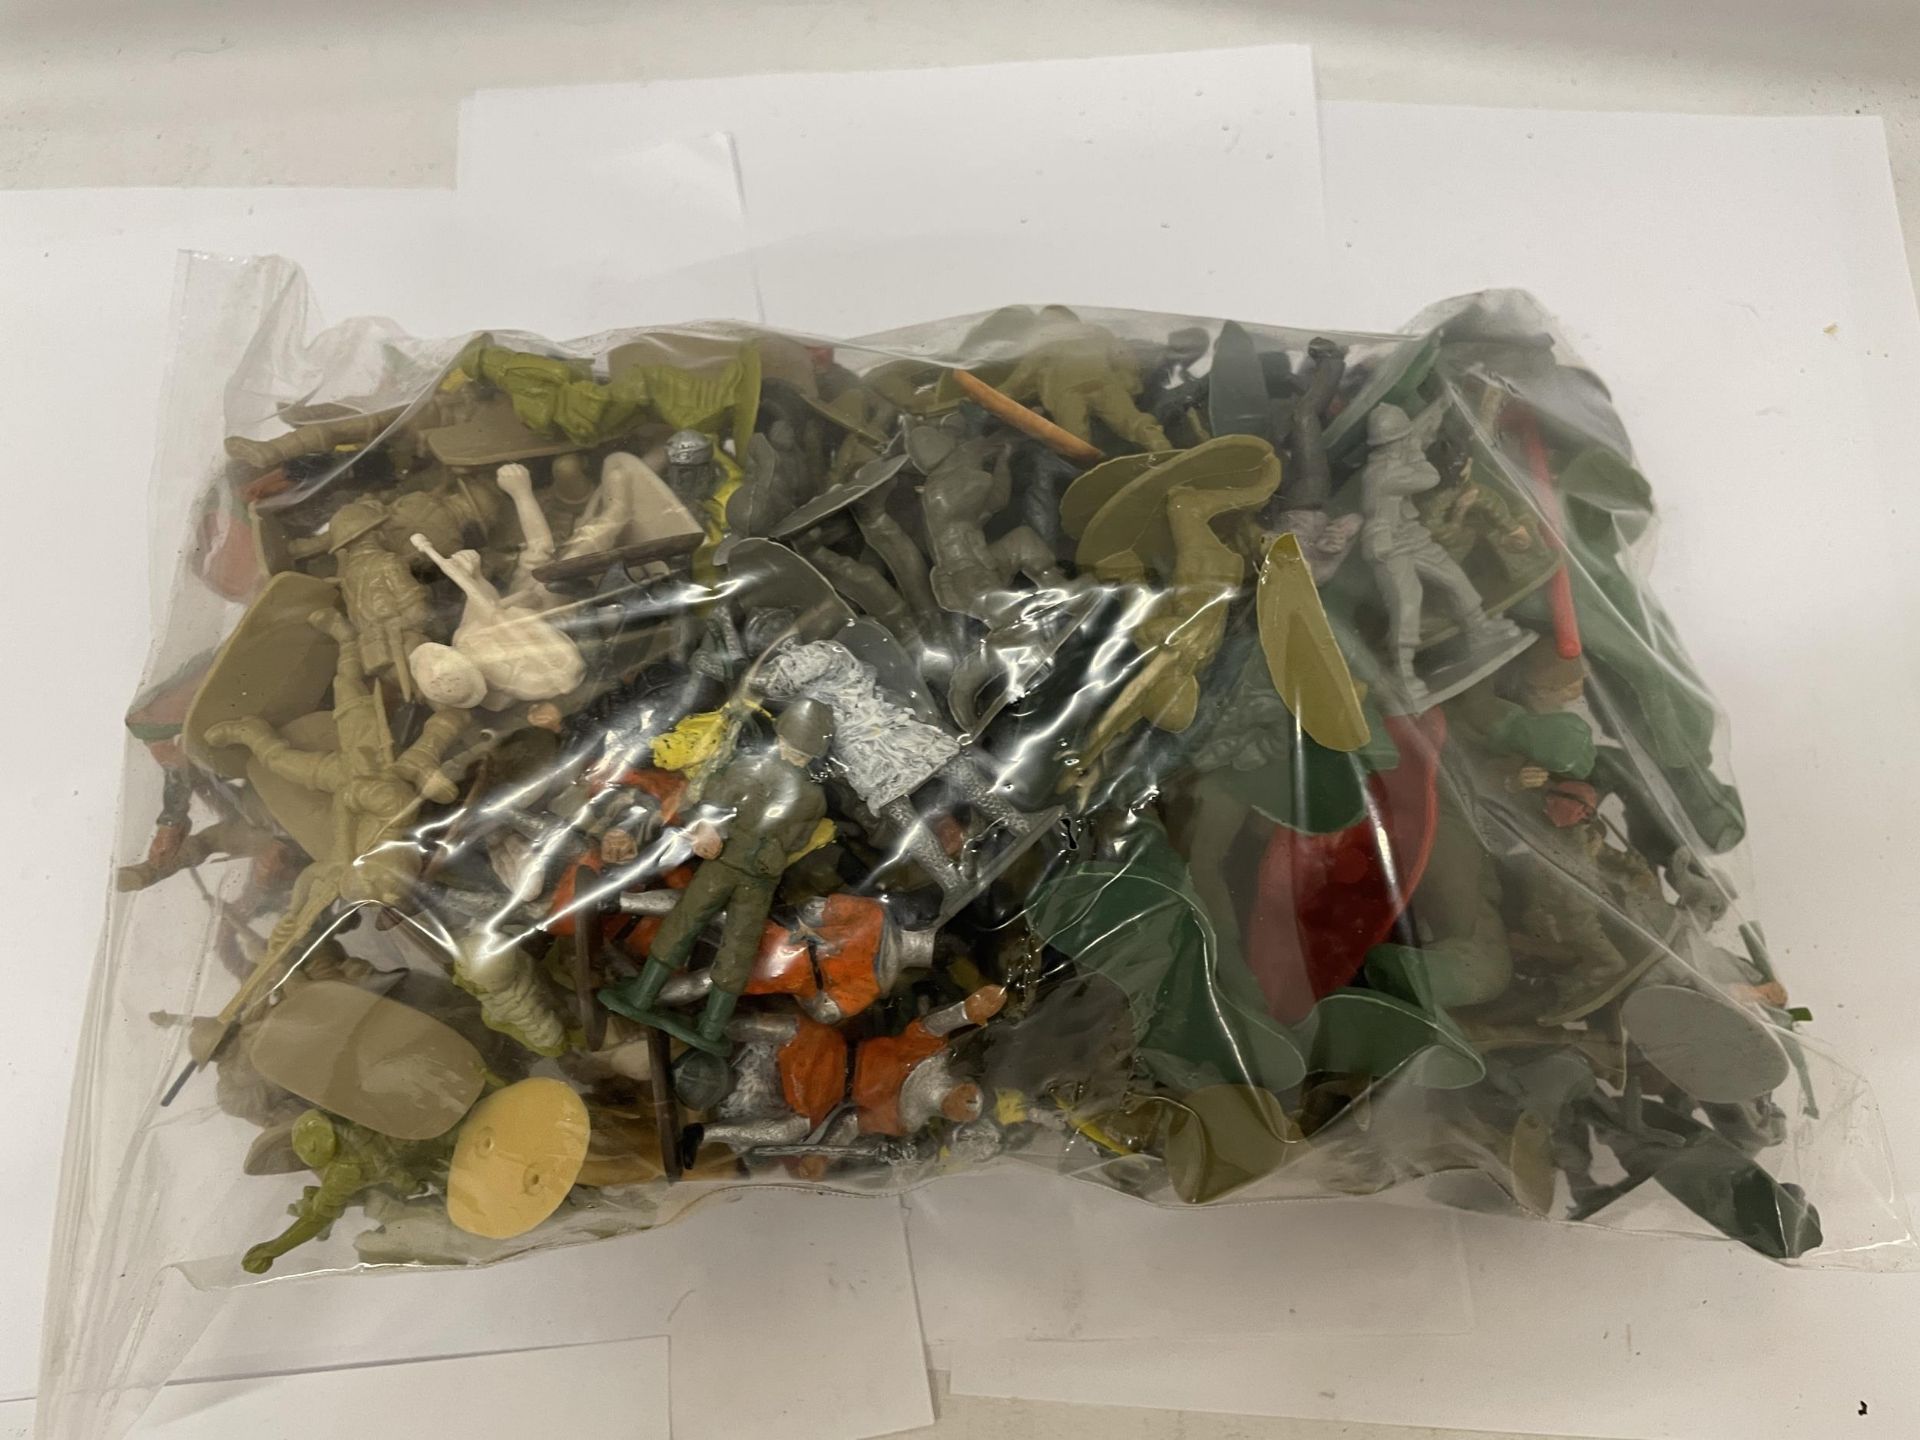 A COLLECTION OF ARMY MEN PLASTIC FIGURES IN BAGS - Image 3 of 3